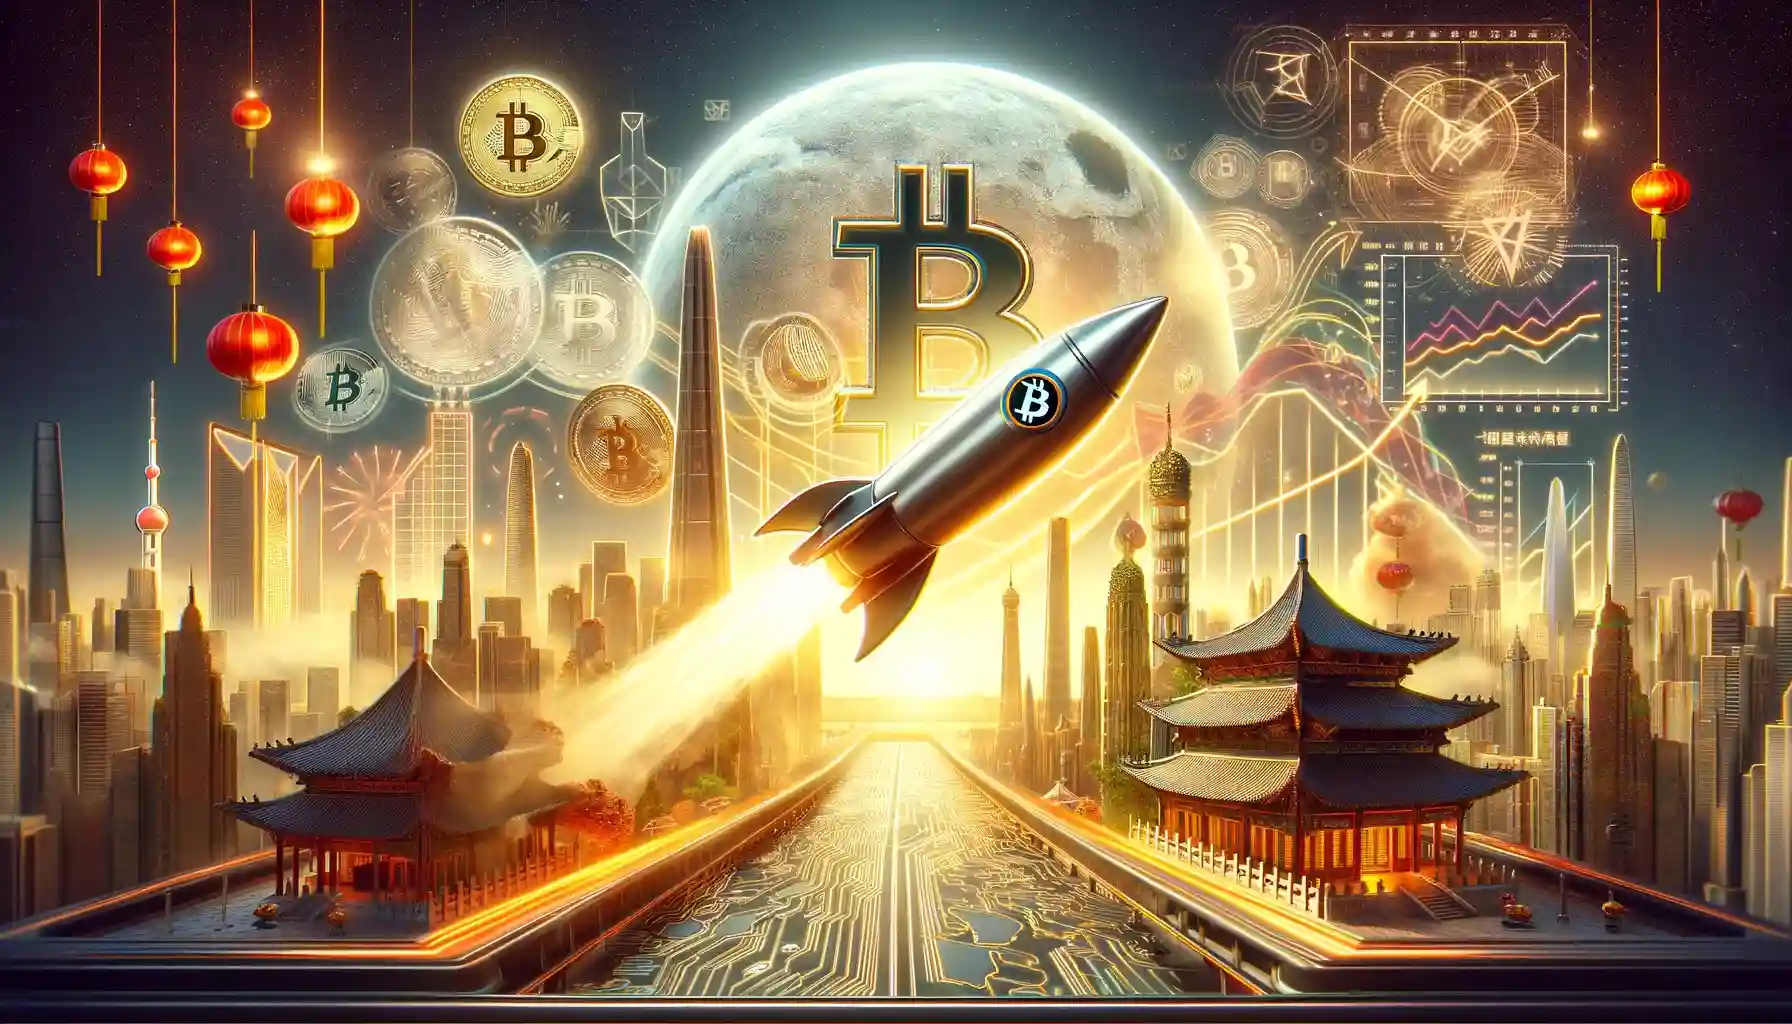 Bitcoin to $1 million by 2028 thanks to China-led surge, predicts exec